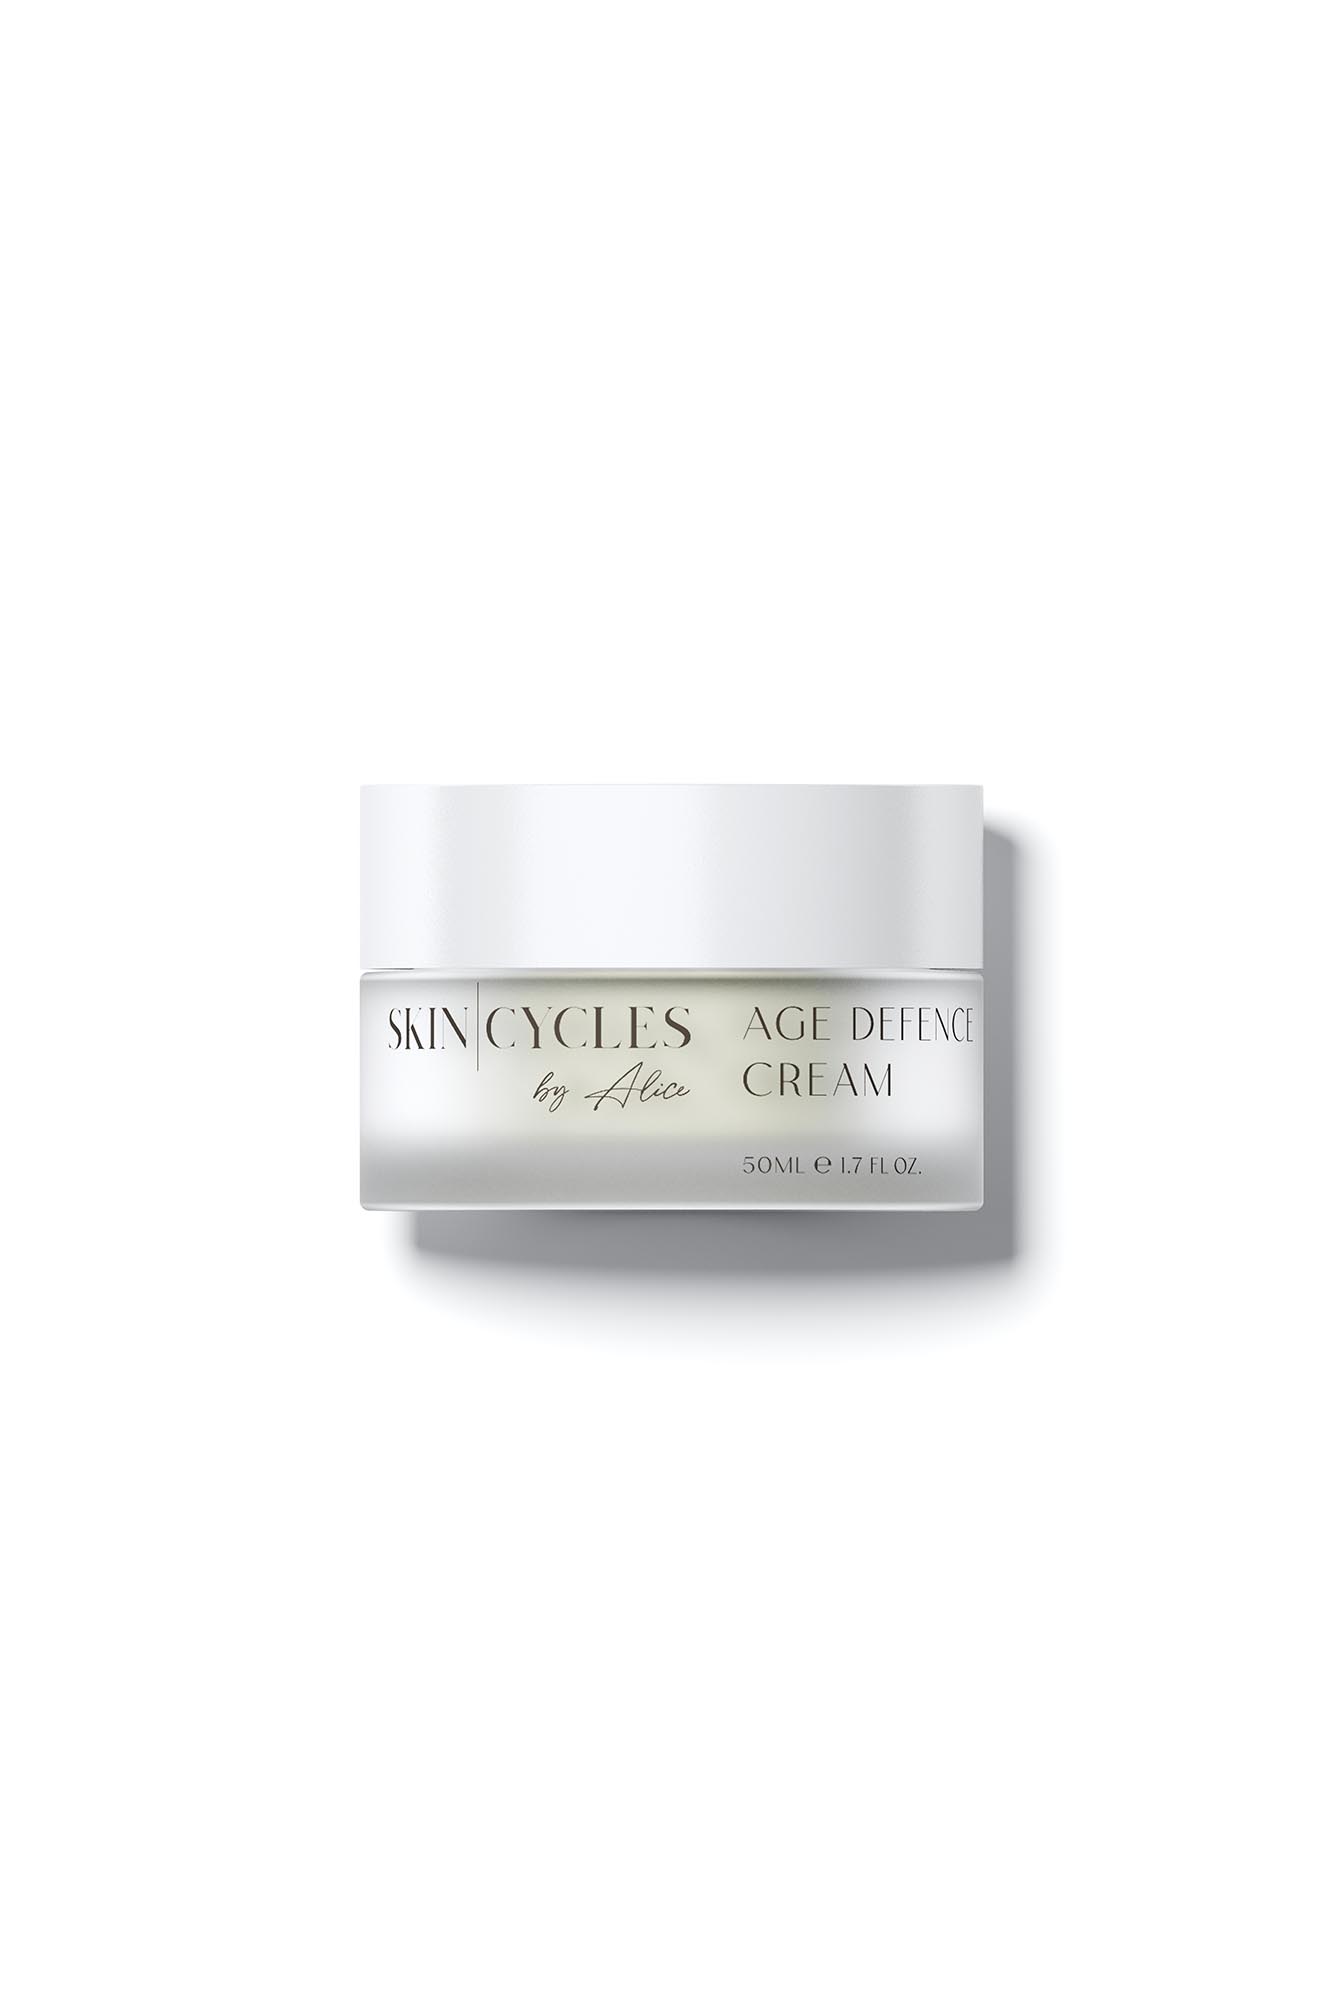 age-defence-cream_0004_MG-1143-Skincycles-Products-Product-Age-Defence-Cream-Final-HR-V01-01